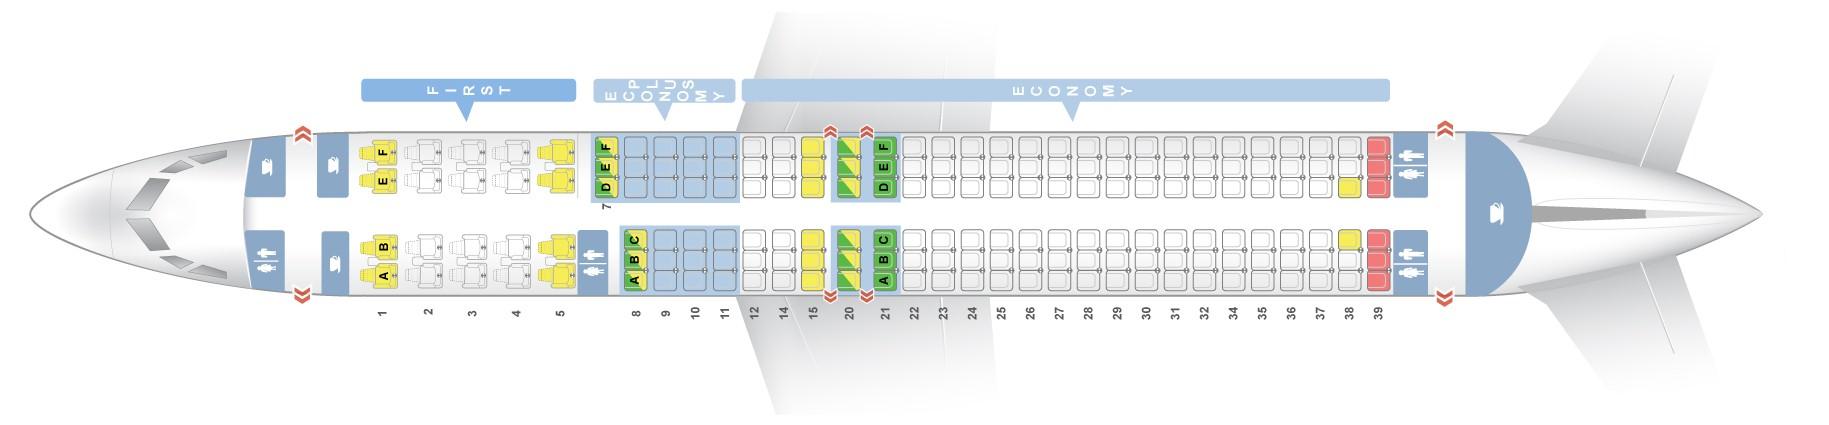 Seat map Boeing 737-900 United Airlines. Best seats in plane